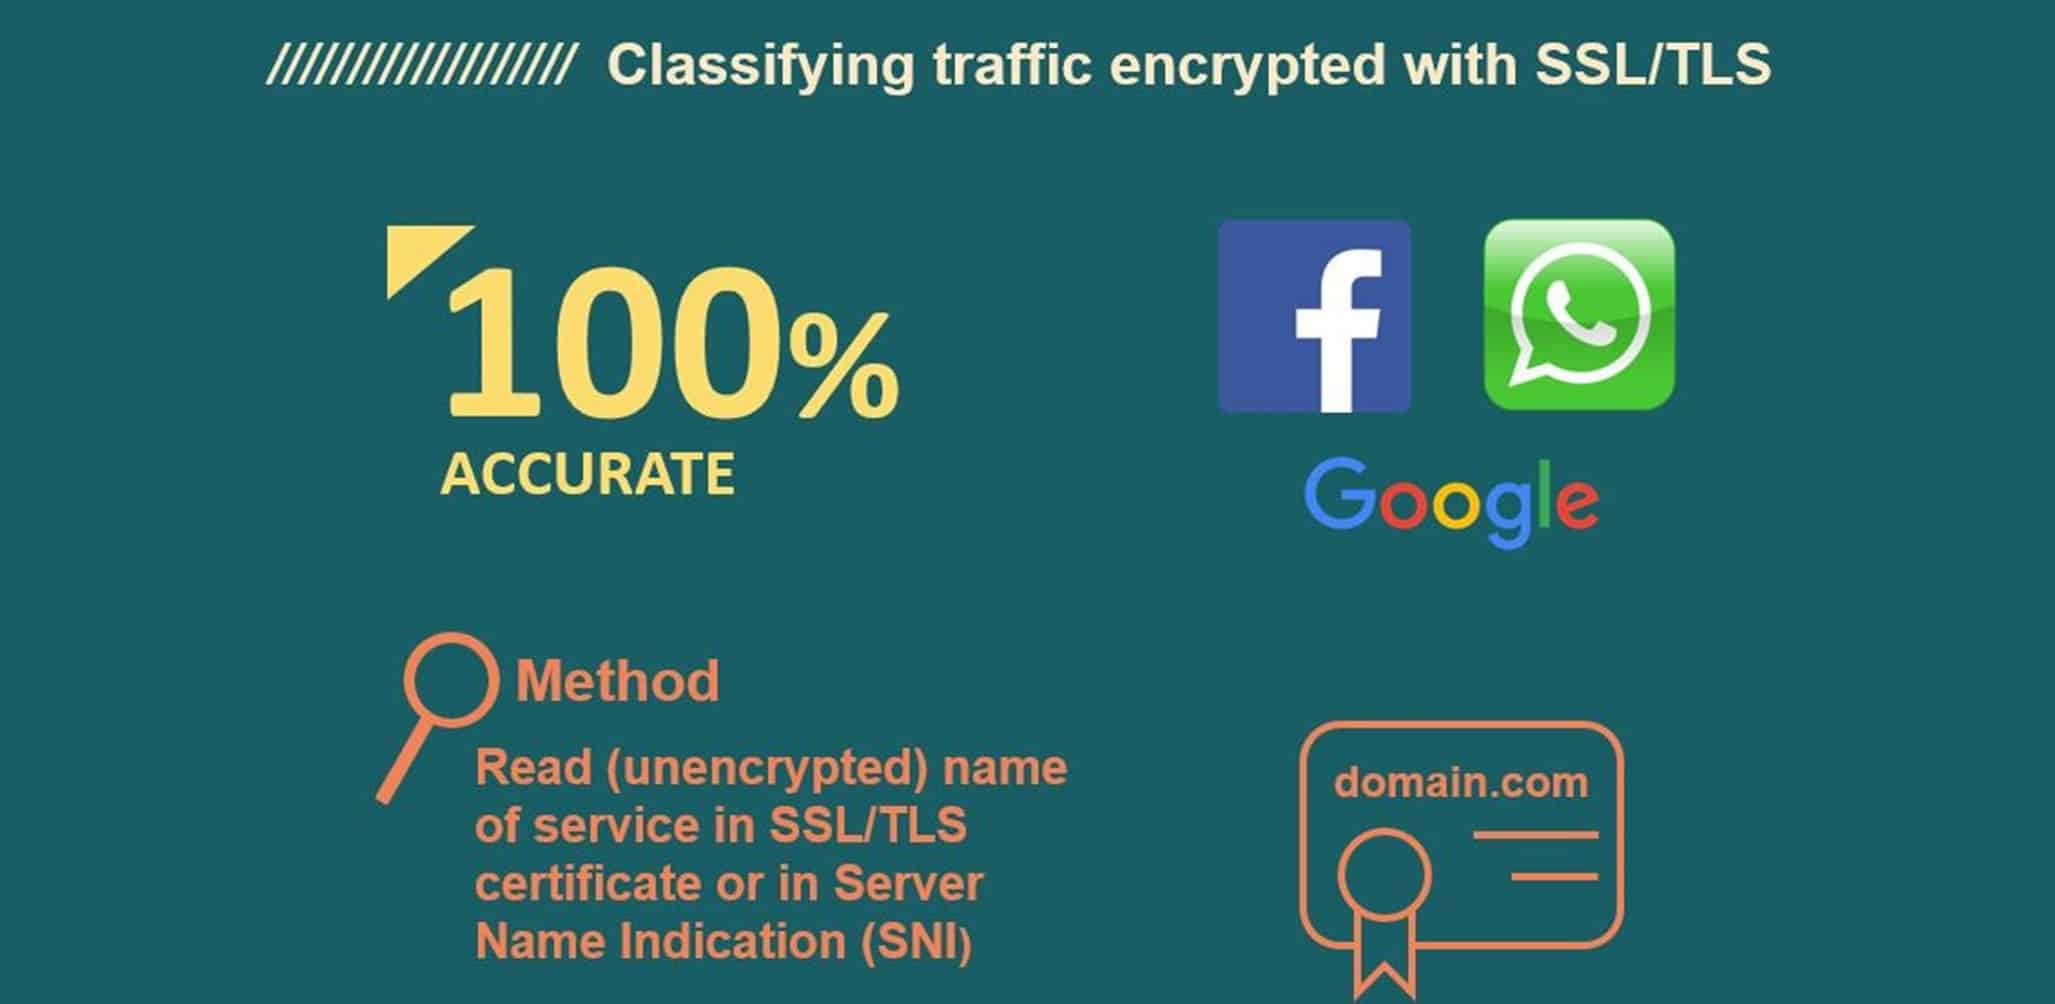 YES! Encrypted Traffic Can Be Classified